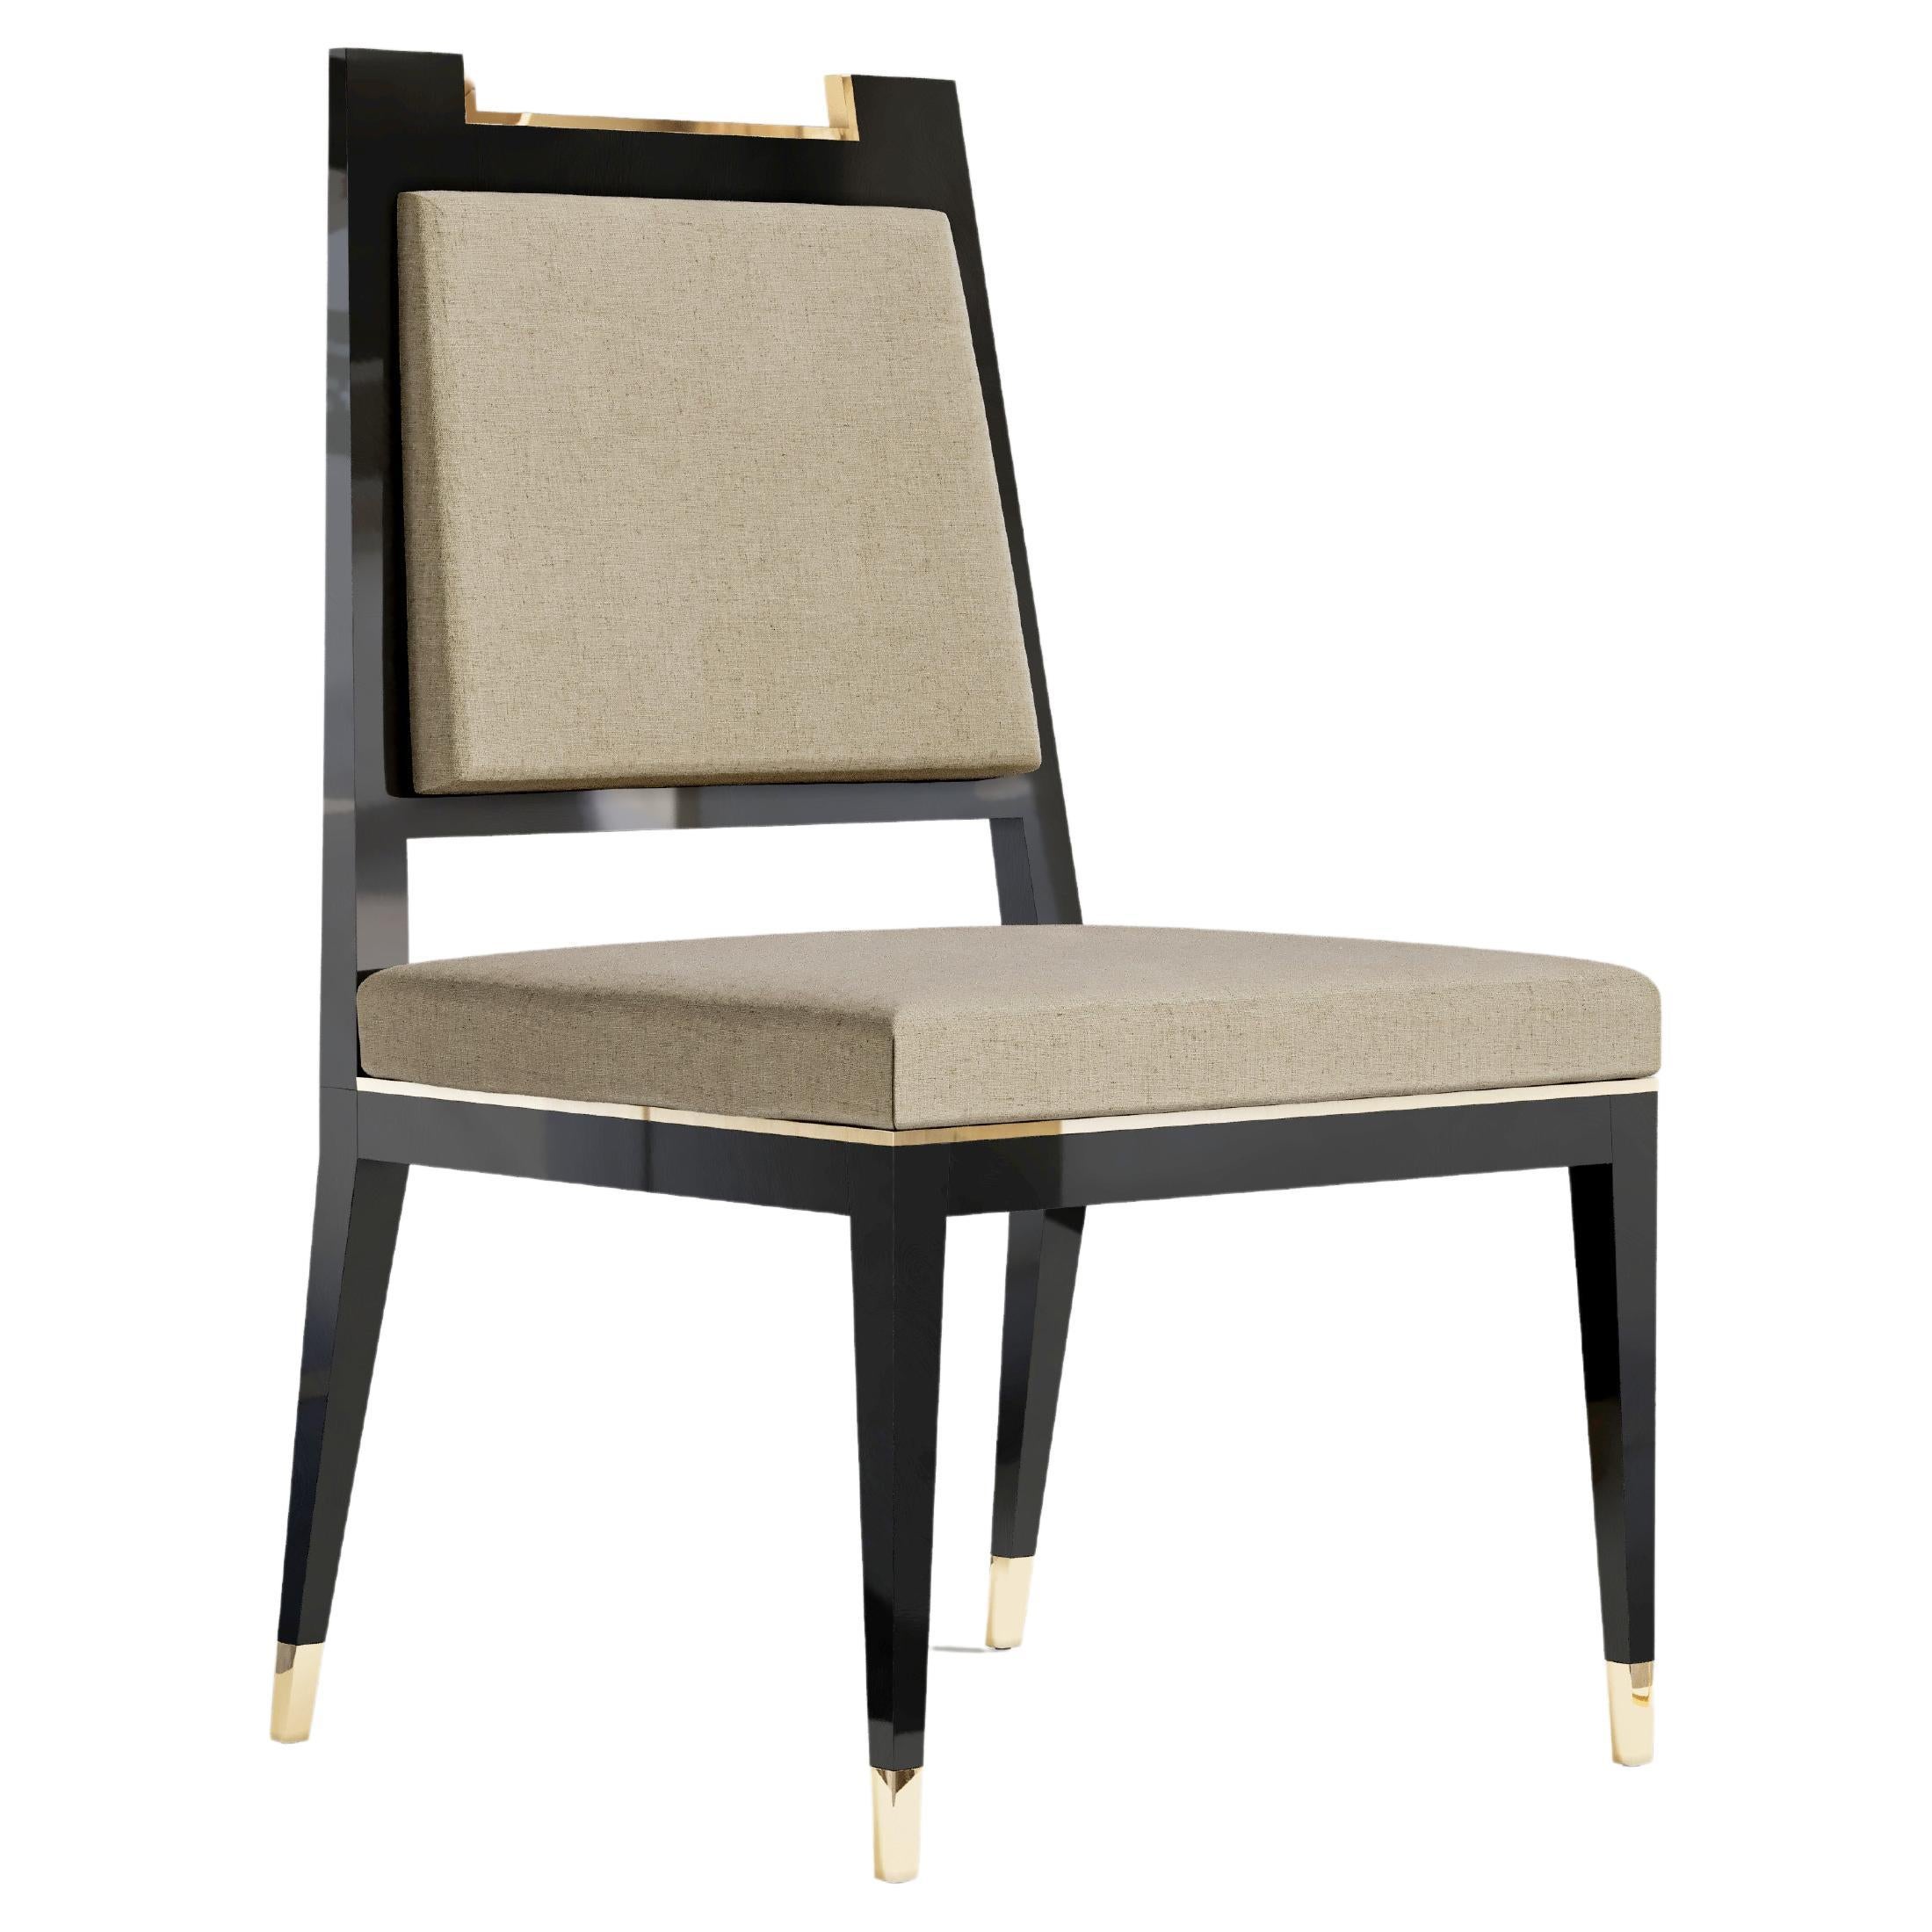 Palena Dining Chair in Black Lacquer